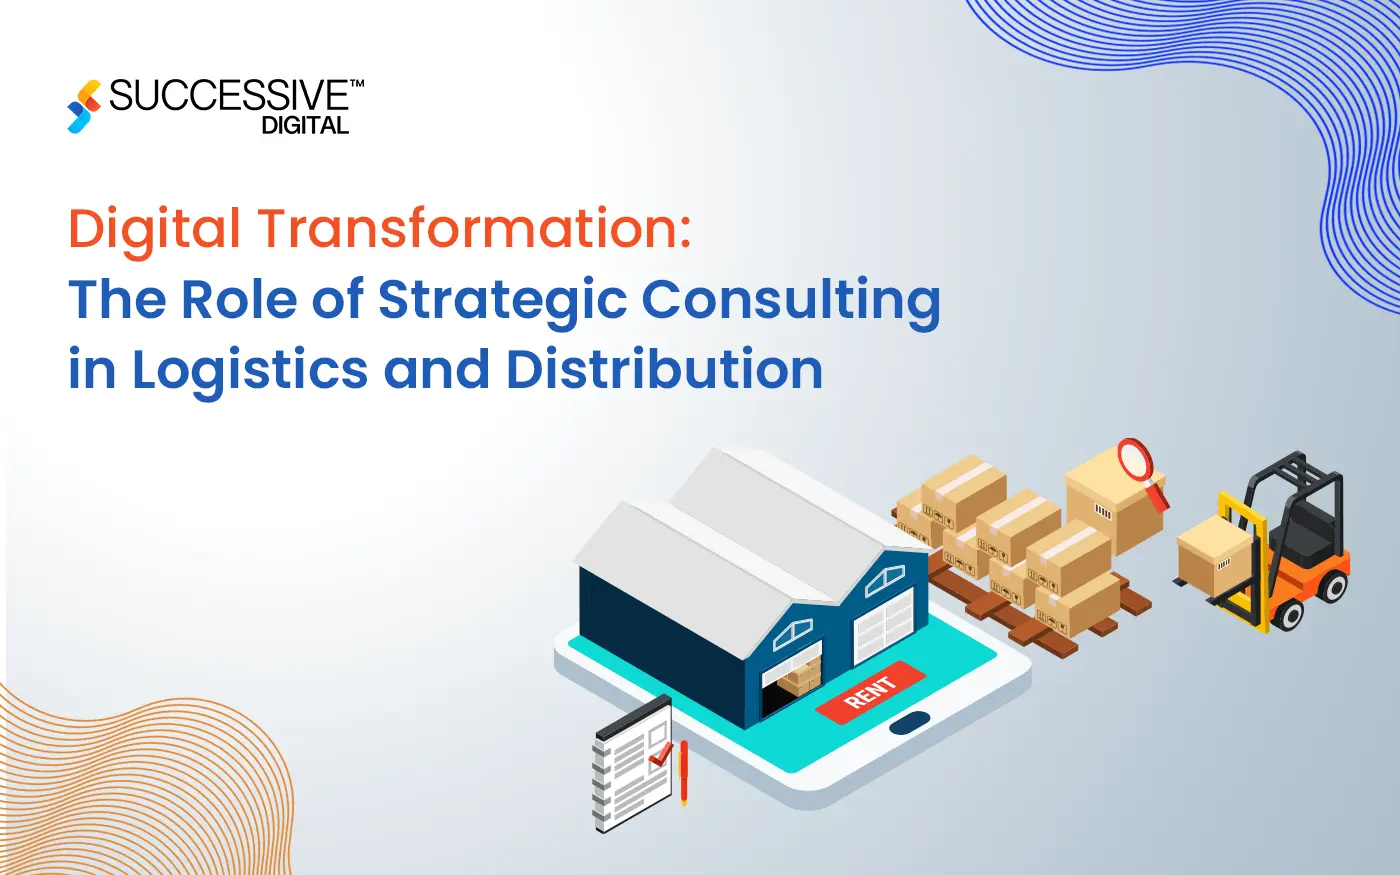 Digital Transformation: The Role of Strategic Consulting in Logistics and Distribution